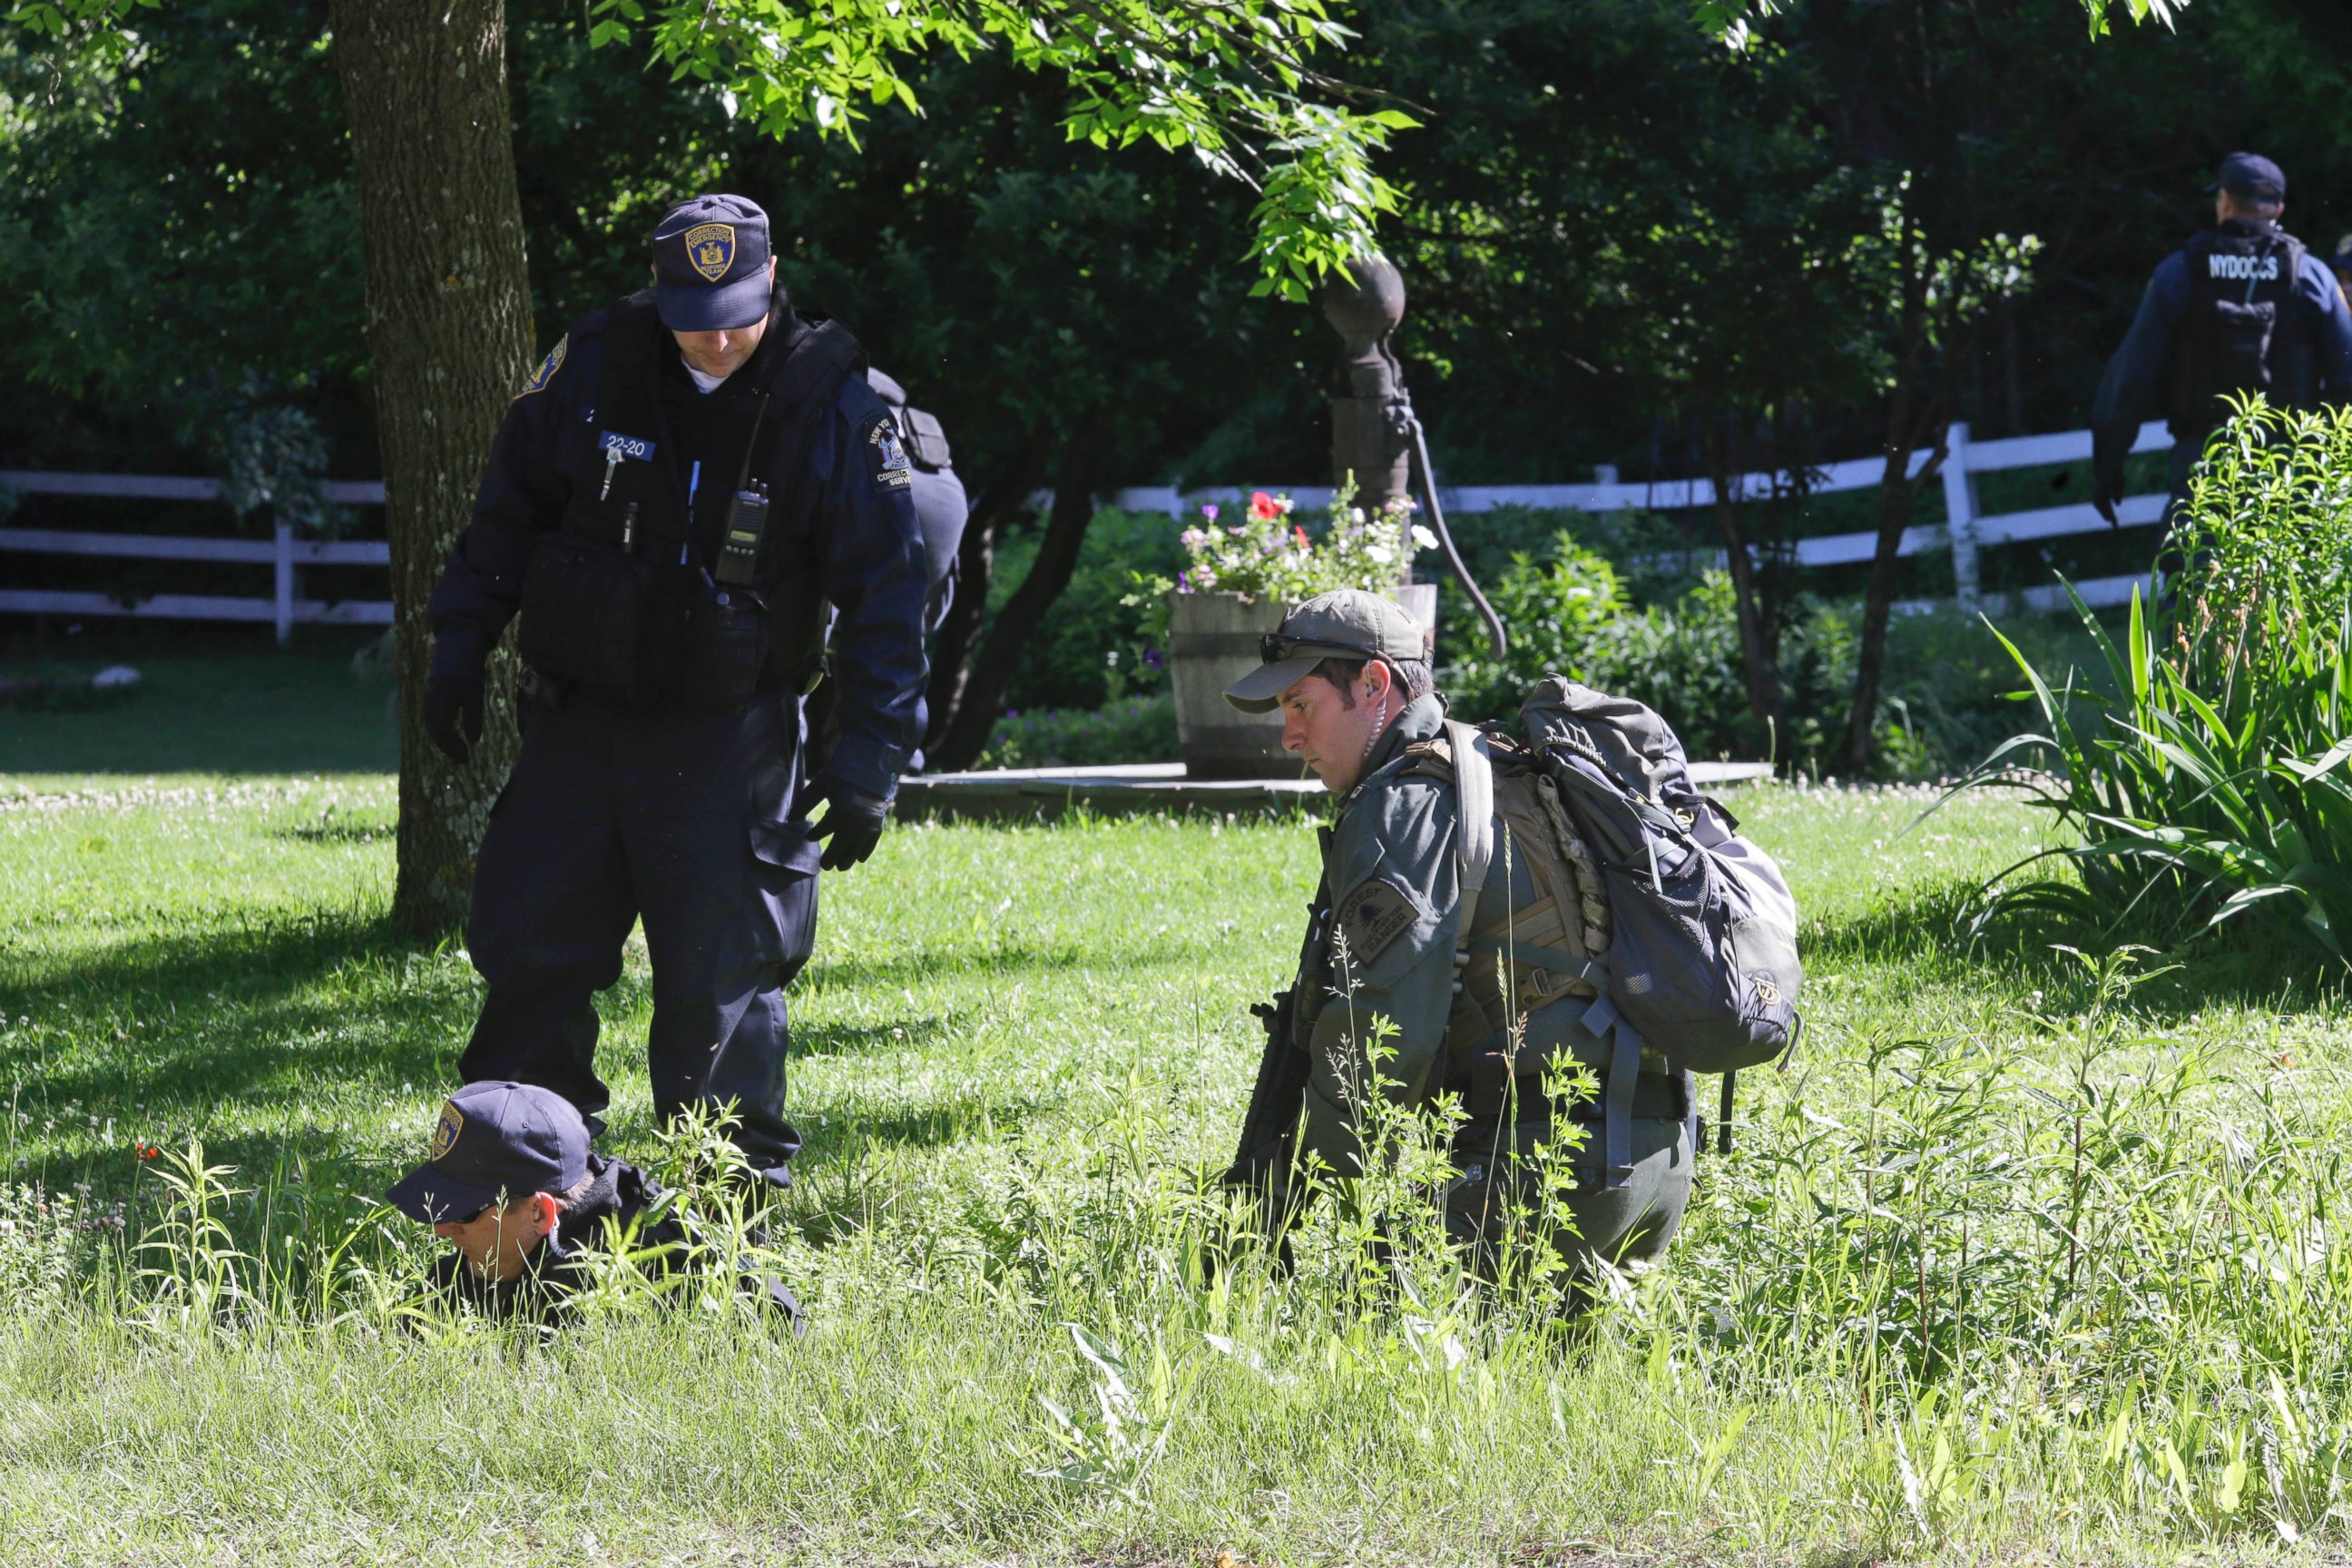 PHOTO: New York State Department of Corrections Officers and a forest ranger patrol an area in Owls Head, N.Y. for convicted murderers Richard Matt and David Sweat, June 26, 2015.